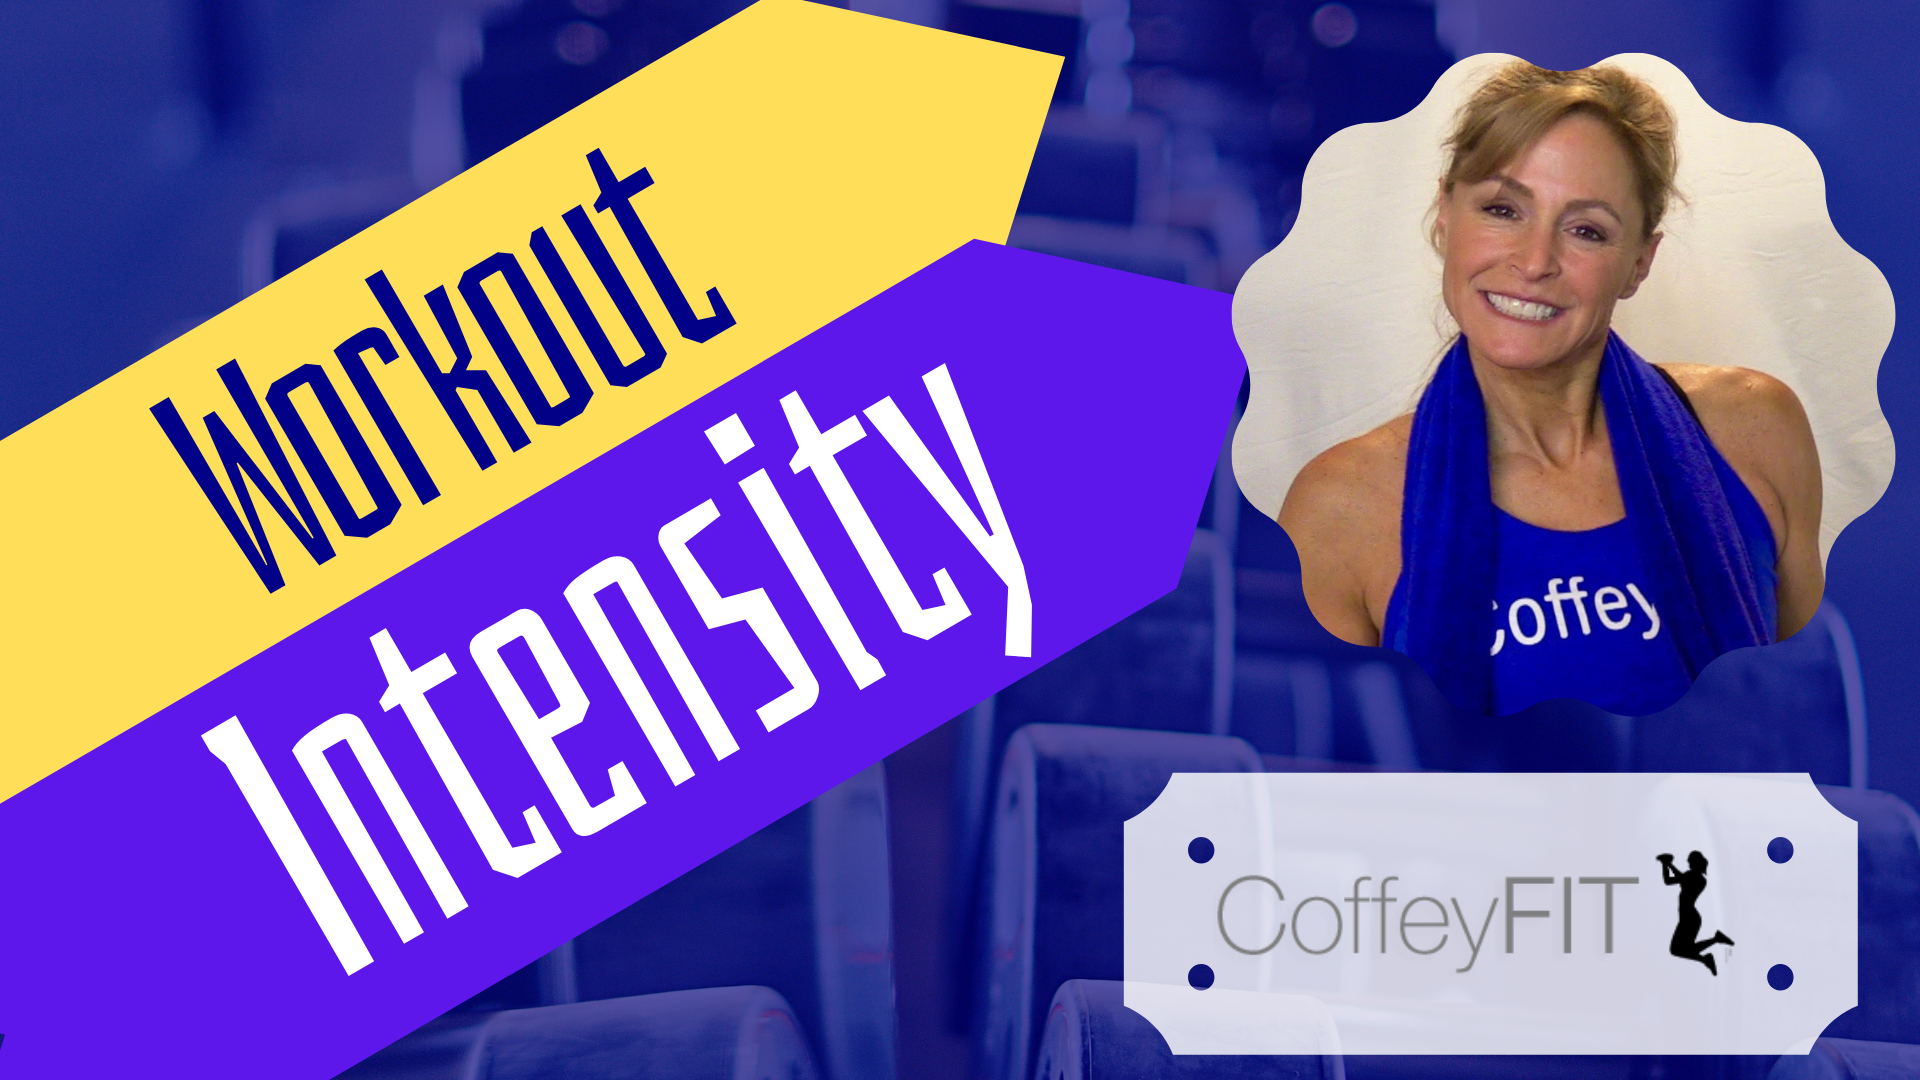 Image of Workout Intensity Video Thumbnail - CoffeyFit - Coffey In The Morning, The Energy Boost That Lasts All Day!